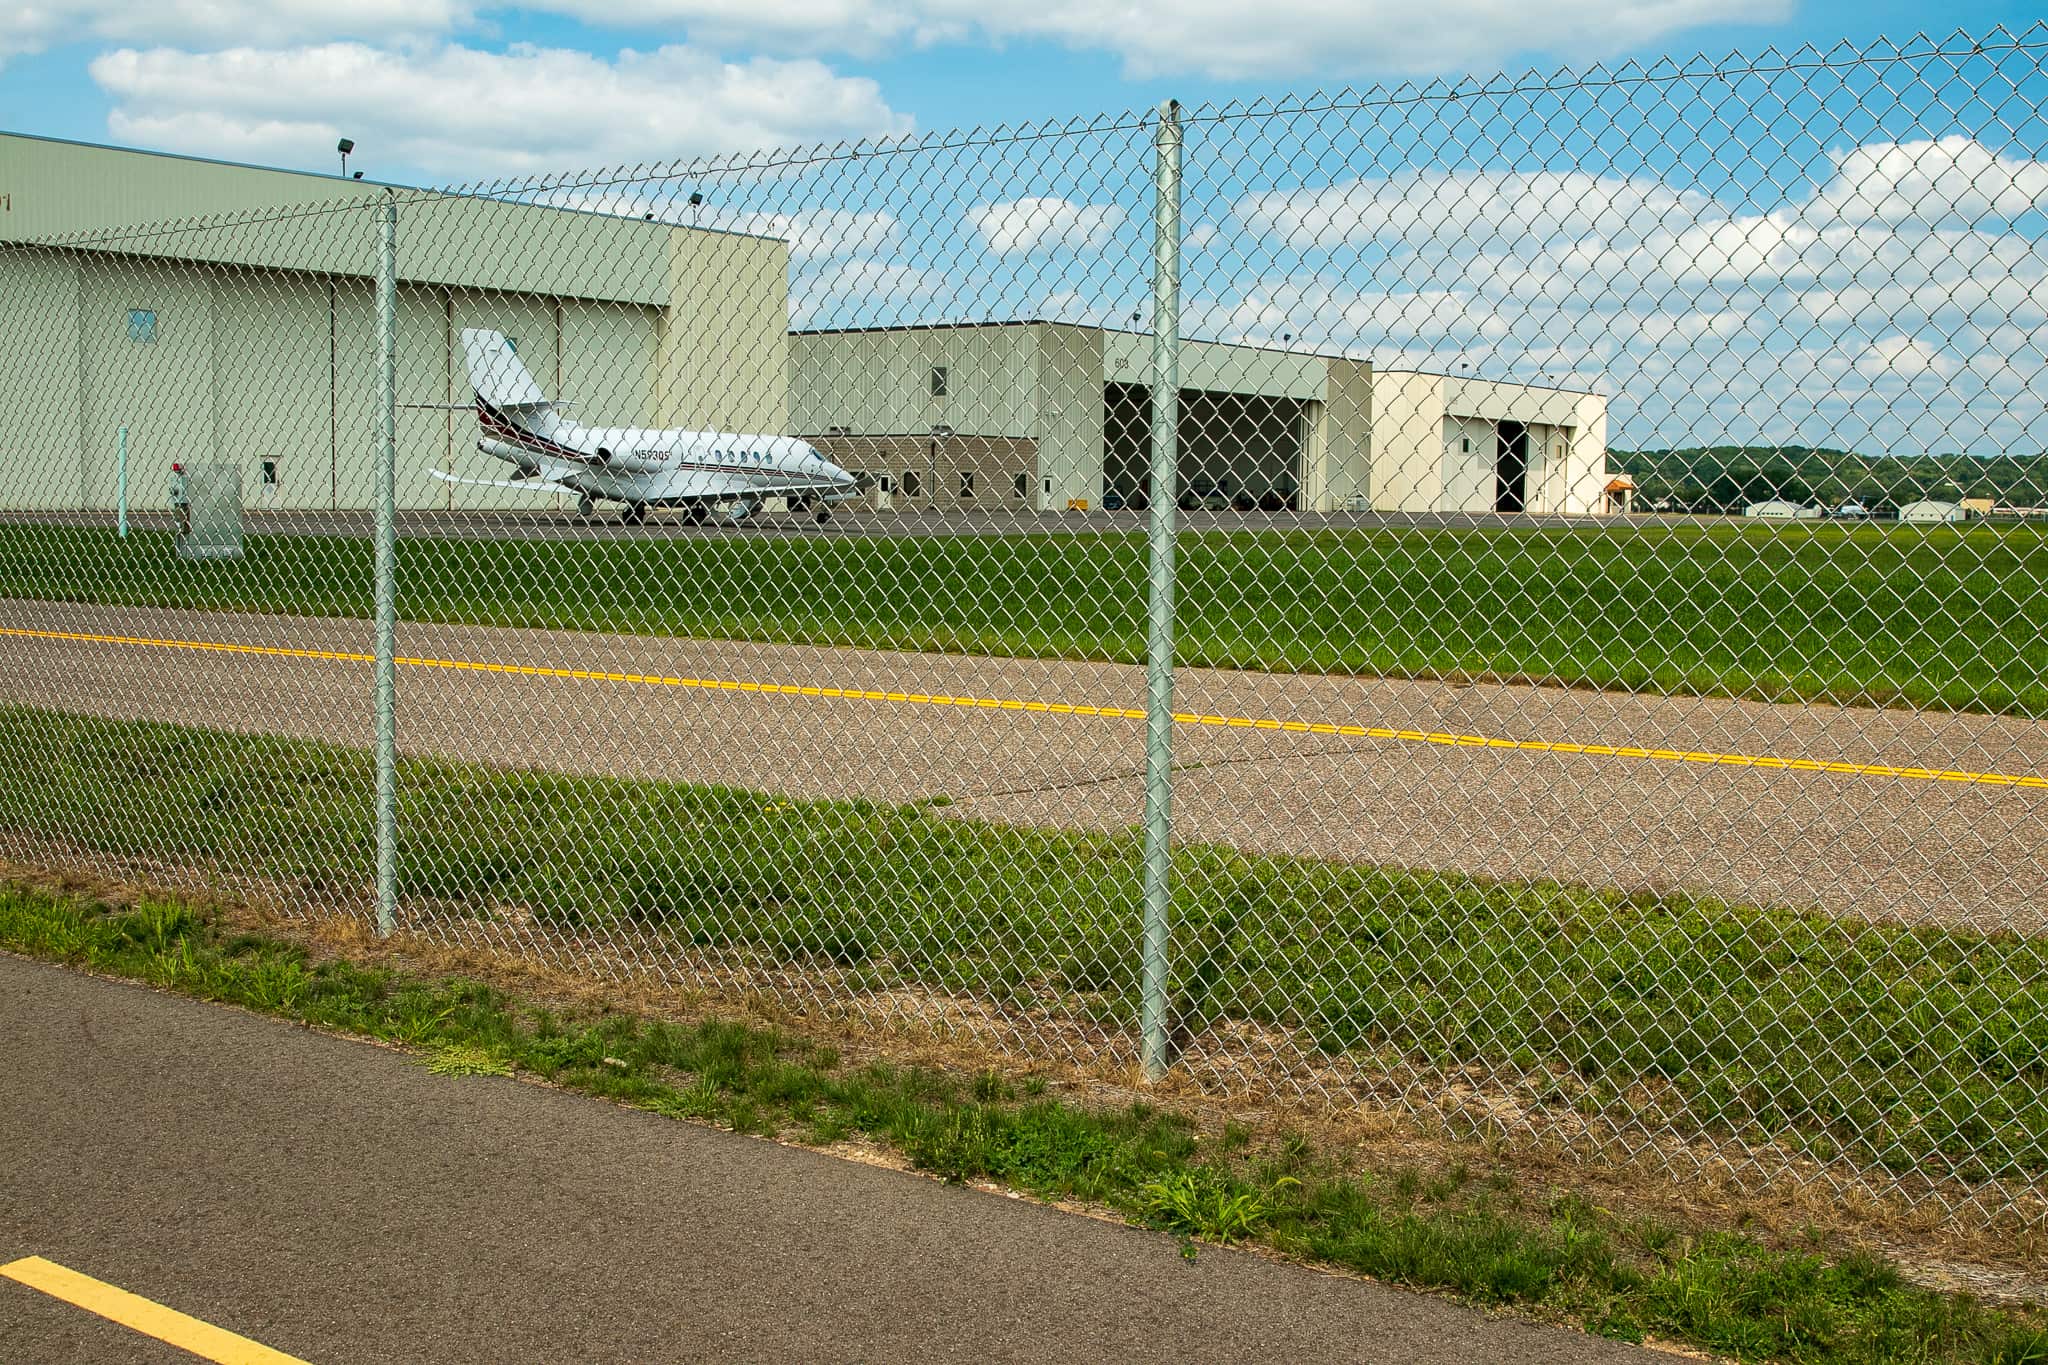 Many well-known local corporations have planes based at St. Paul Downtown Airport. A corporate or charter jet sits on the tarmac awaiting its next flight. The road in the foreground is the private section of Eaton Street within the airport property.